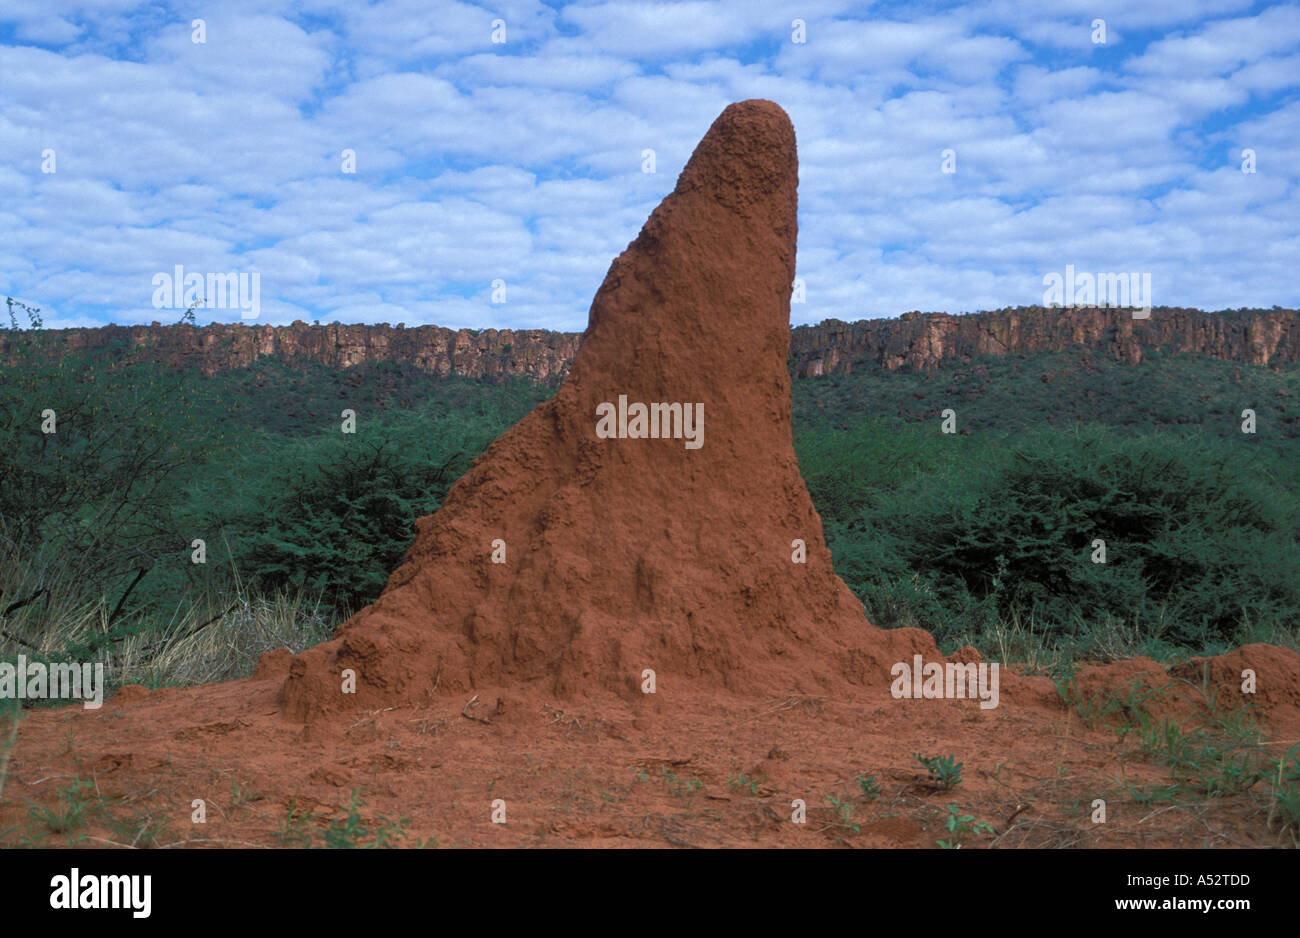 Termite hill piegate in direzione NW Macrotermes michaelseni Waterberg table mountain National Park Namibia Africa Foto Stock